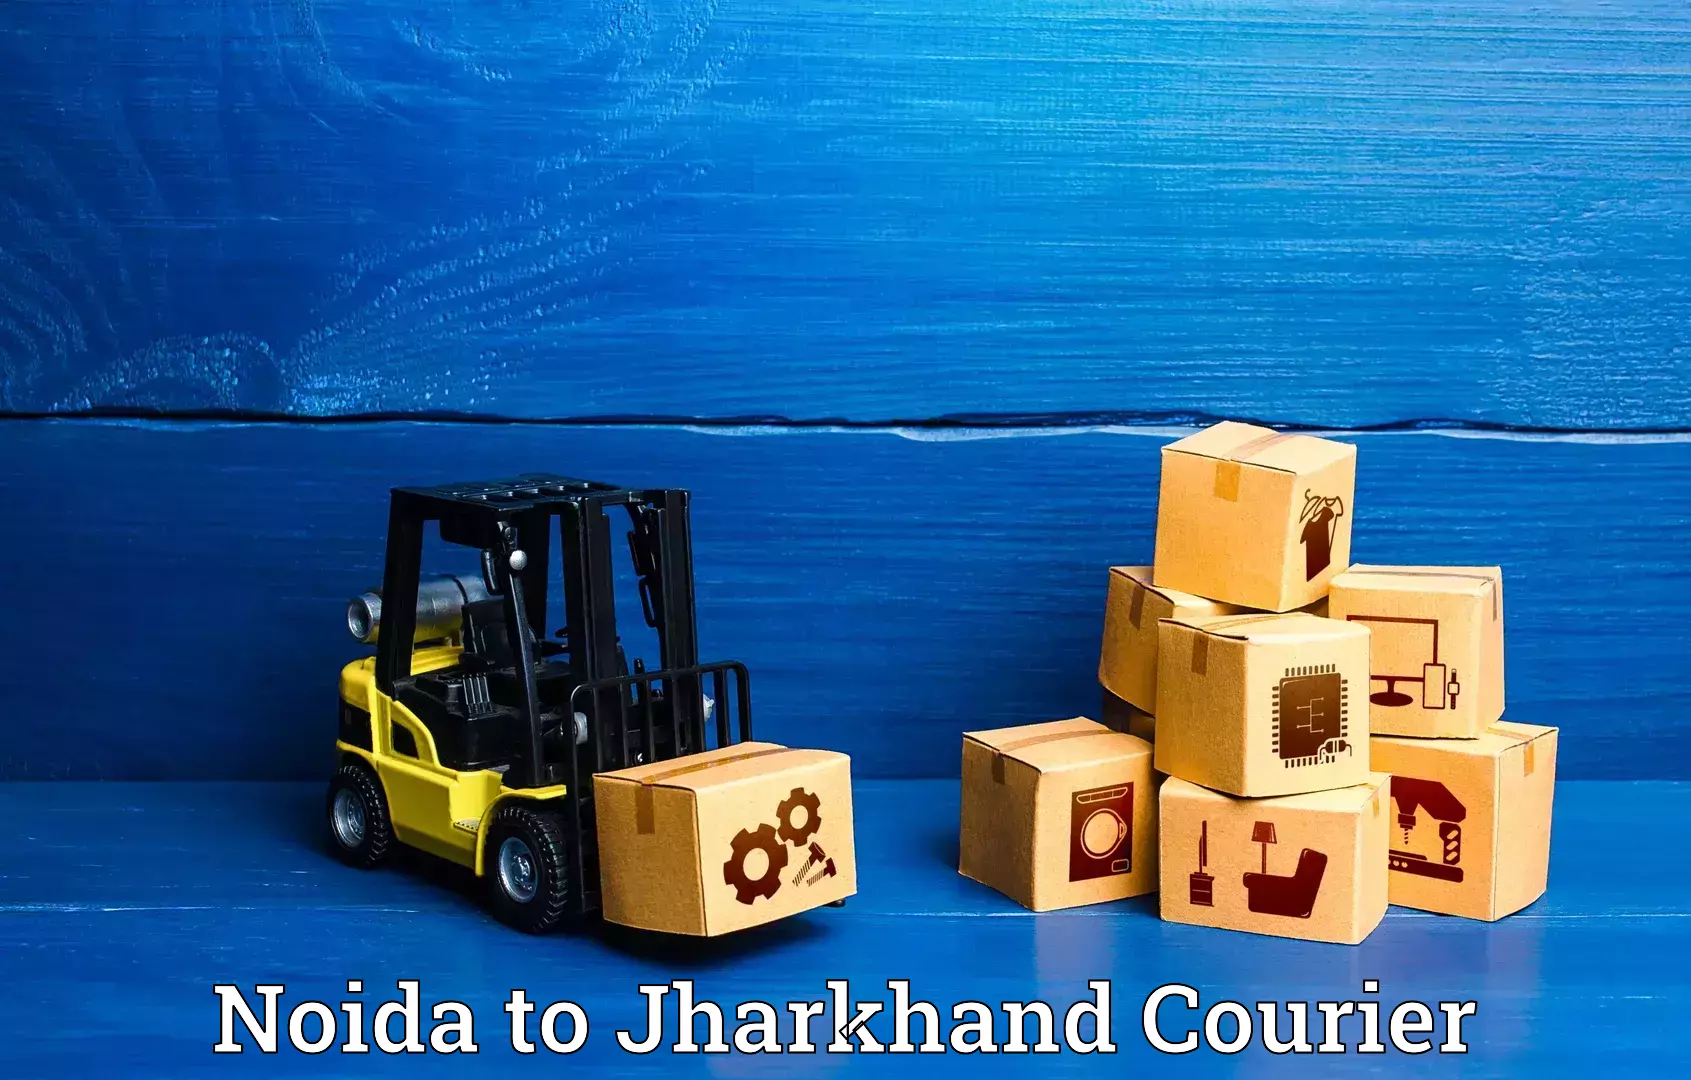 Luggage transport consultancy Noida to Jharkhand